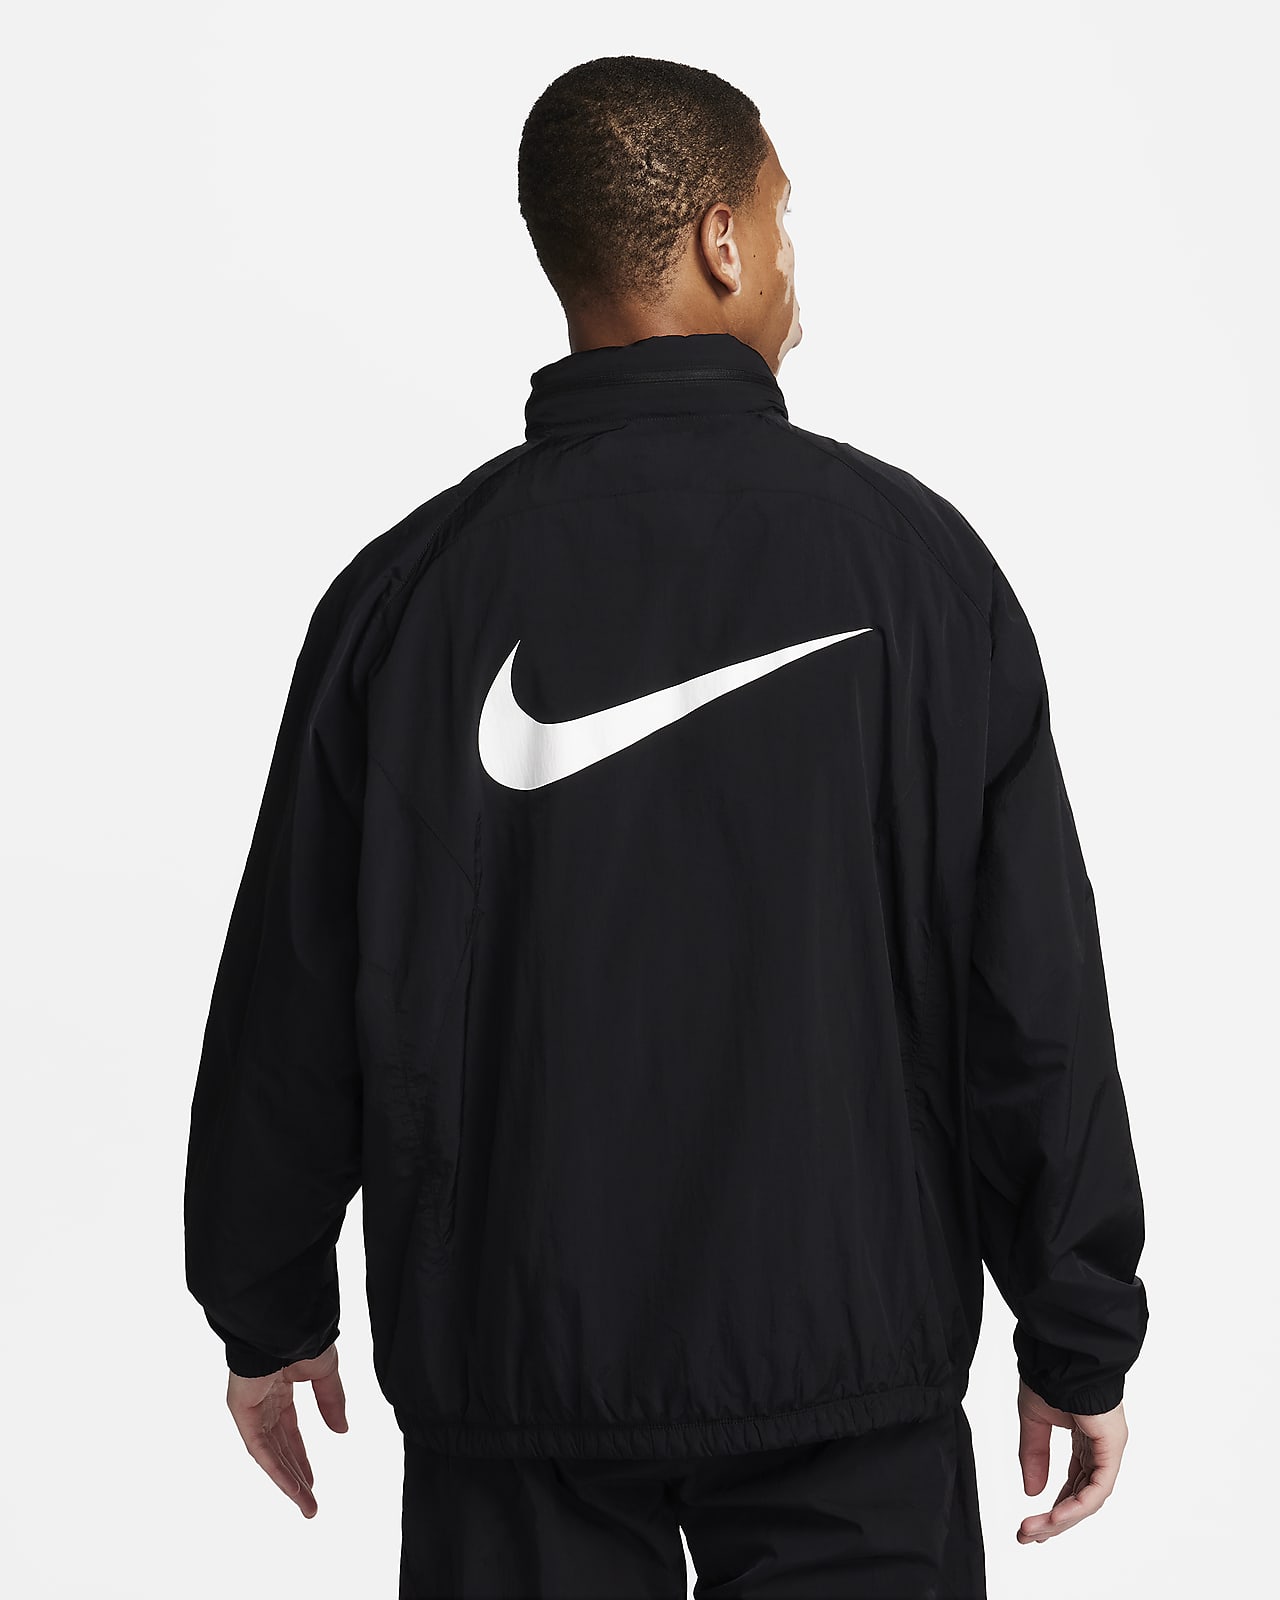 Nike Culture of Football Men's Therma-FIT Repel Hooded Soccer 